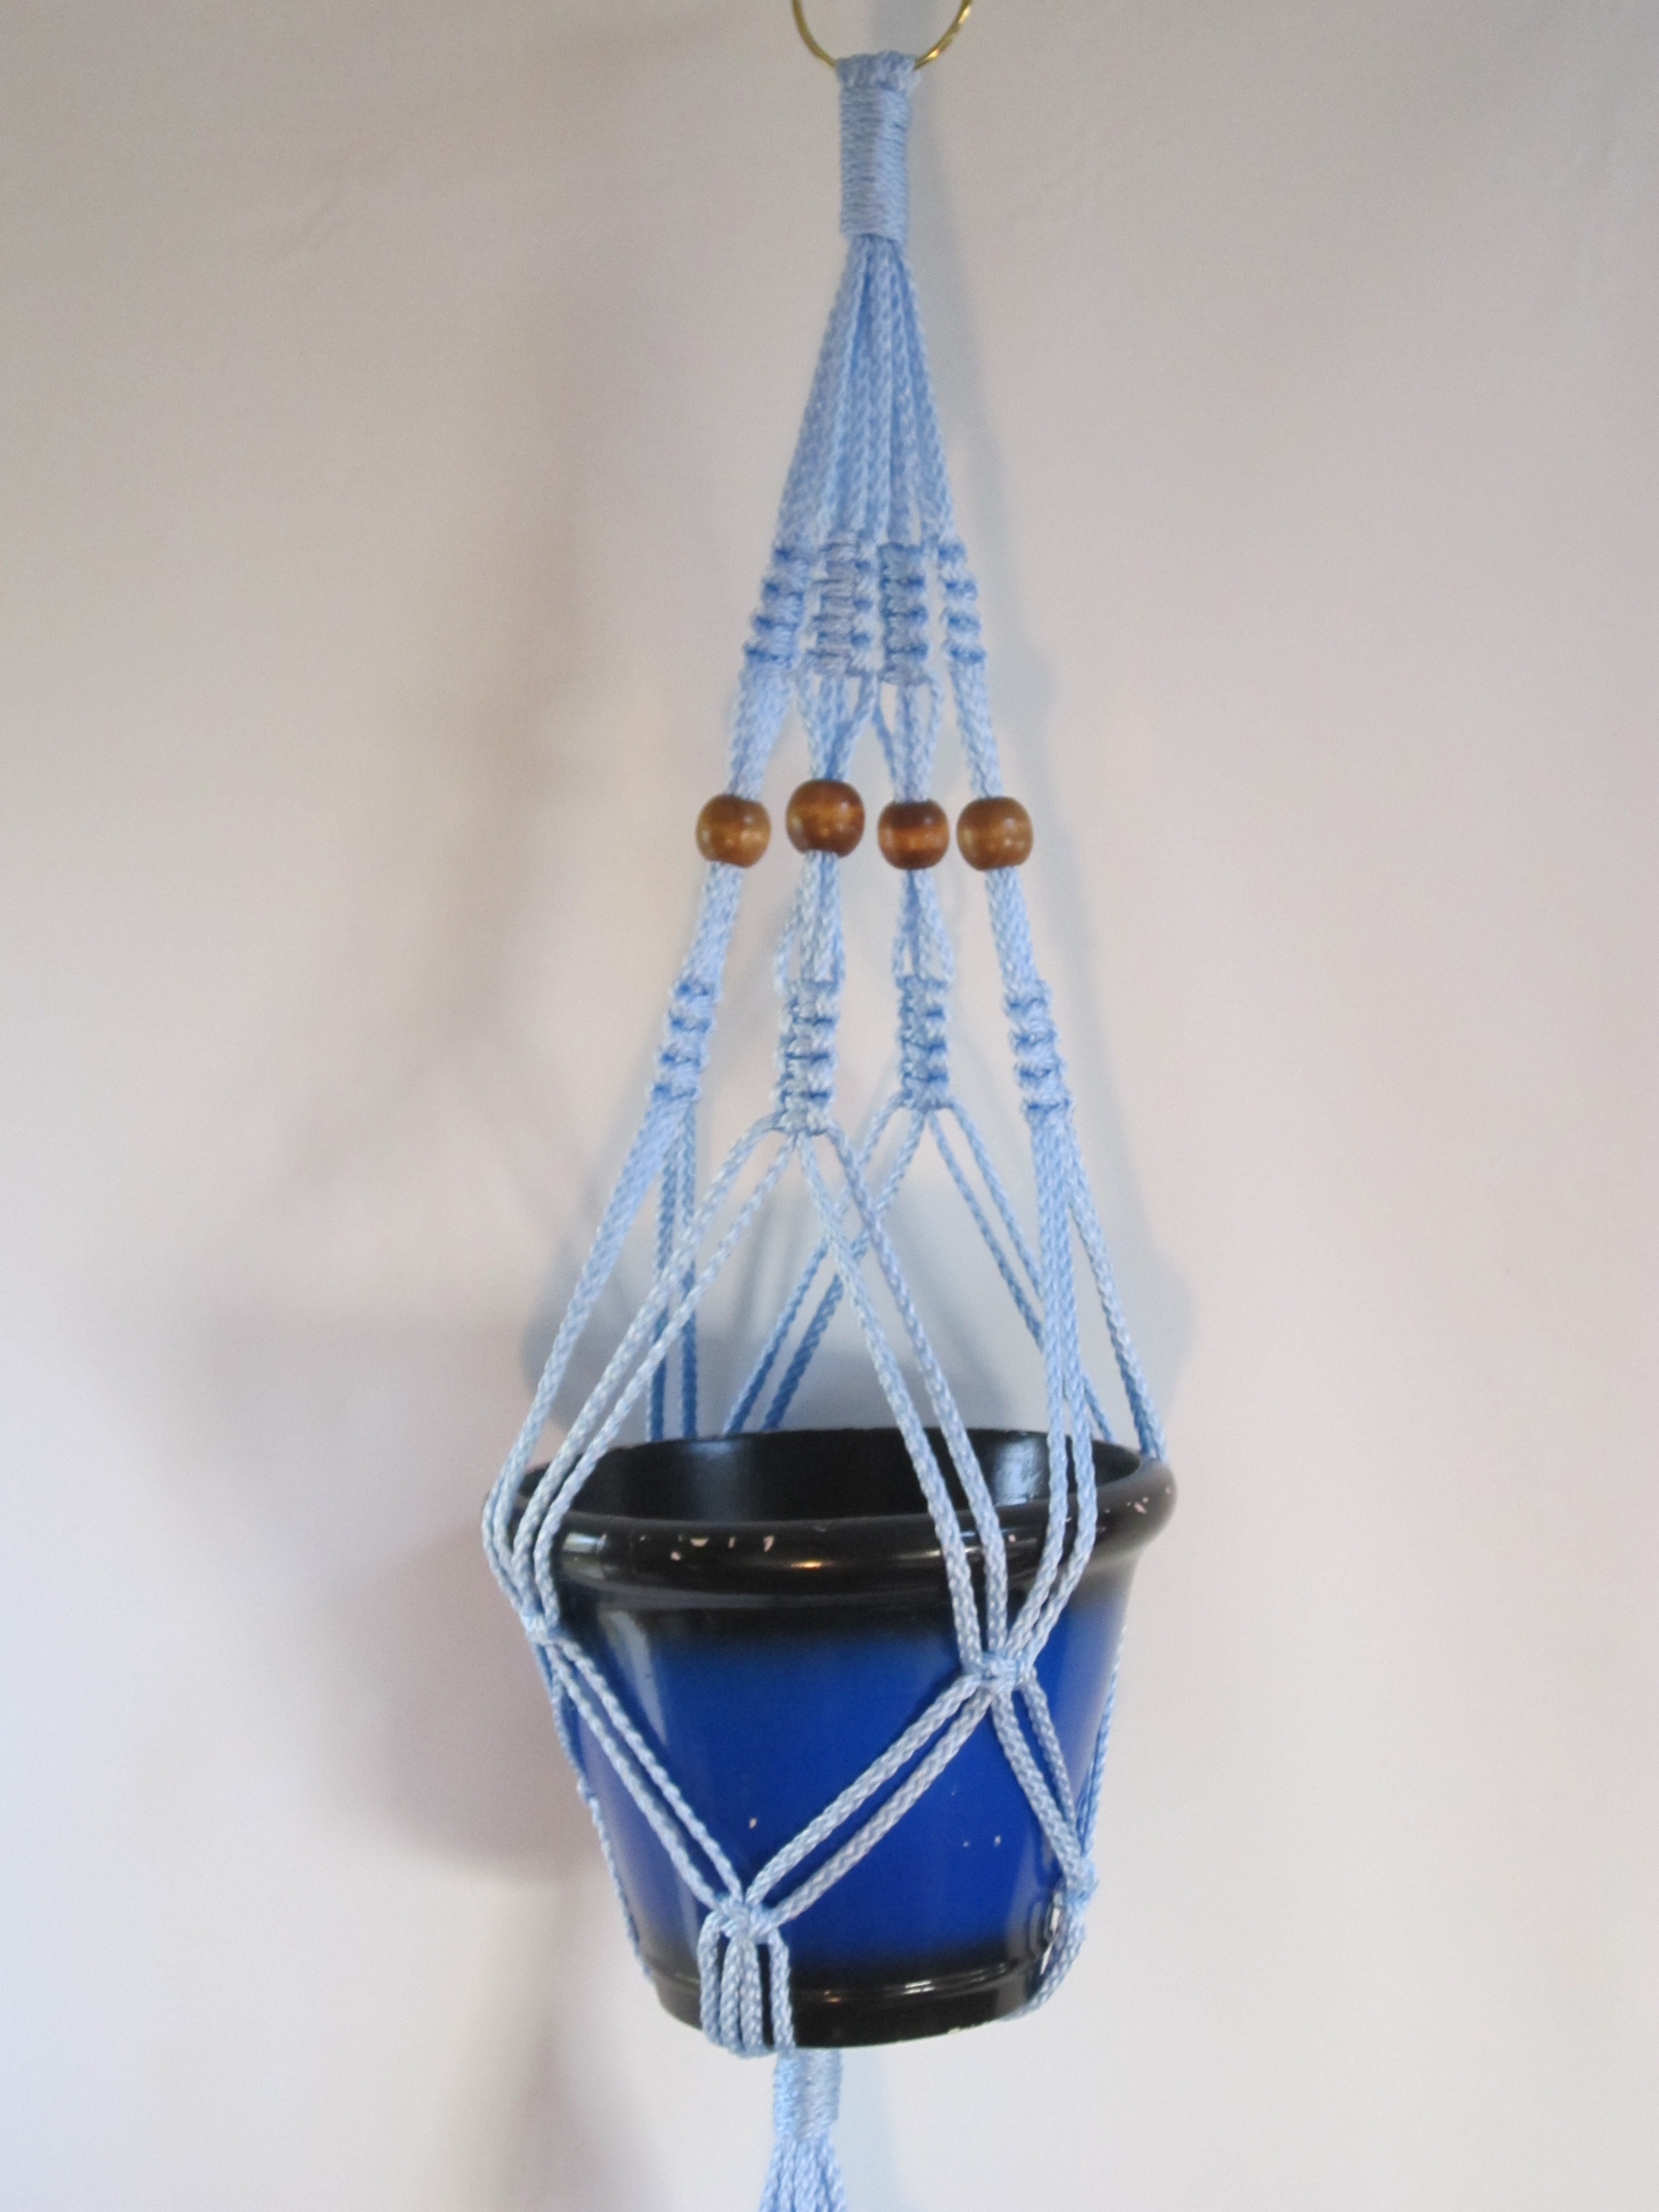 Macrame Design Macrame Plant Hanger 24" Vintage Style 4mm  Sky Blue Cord with Beads